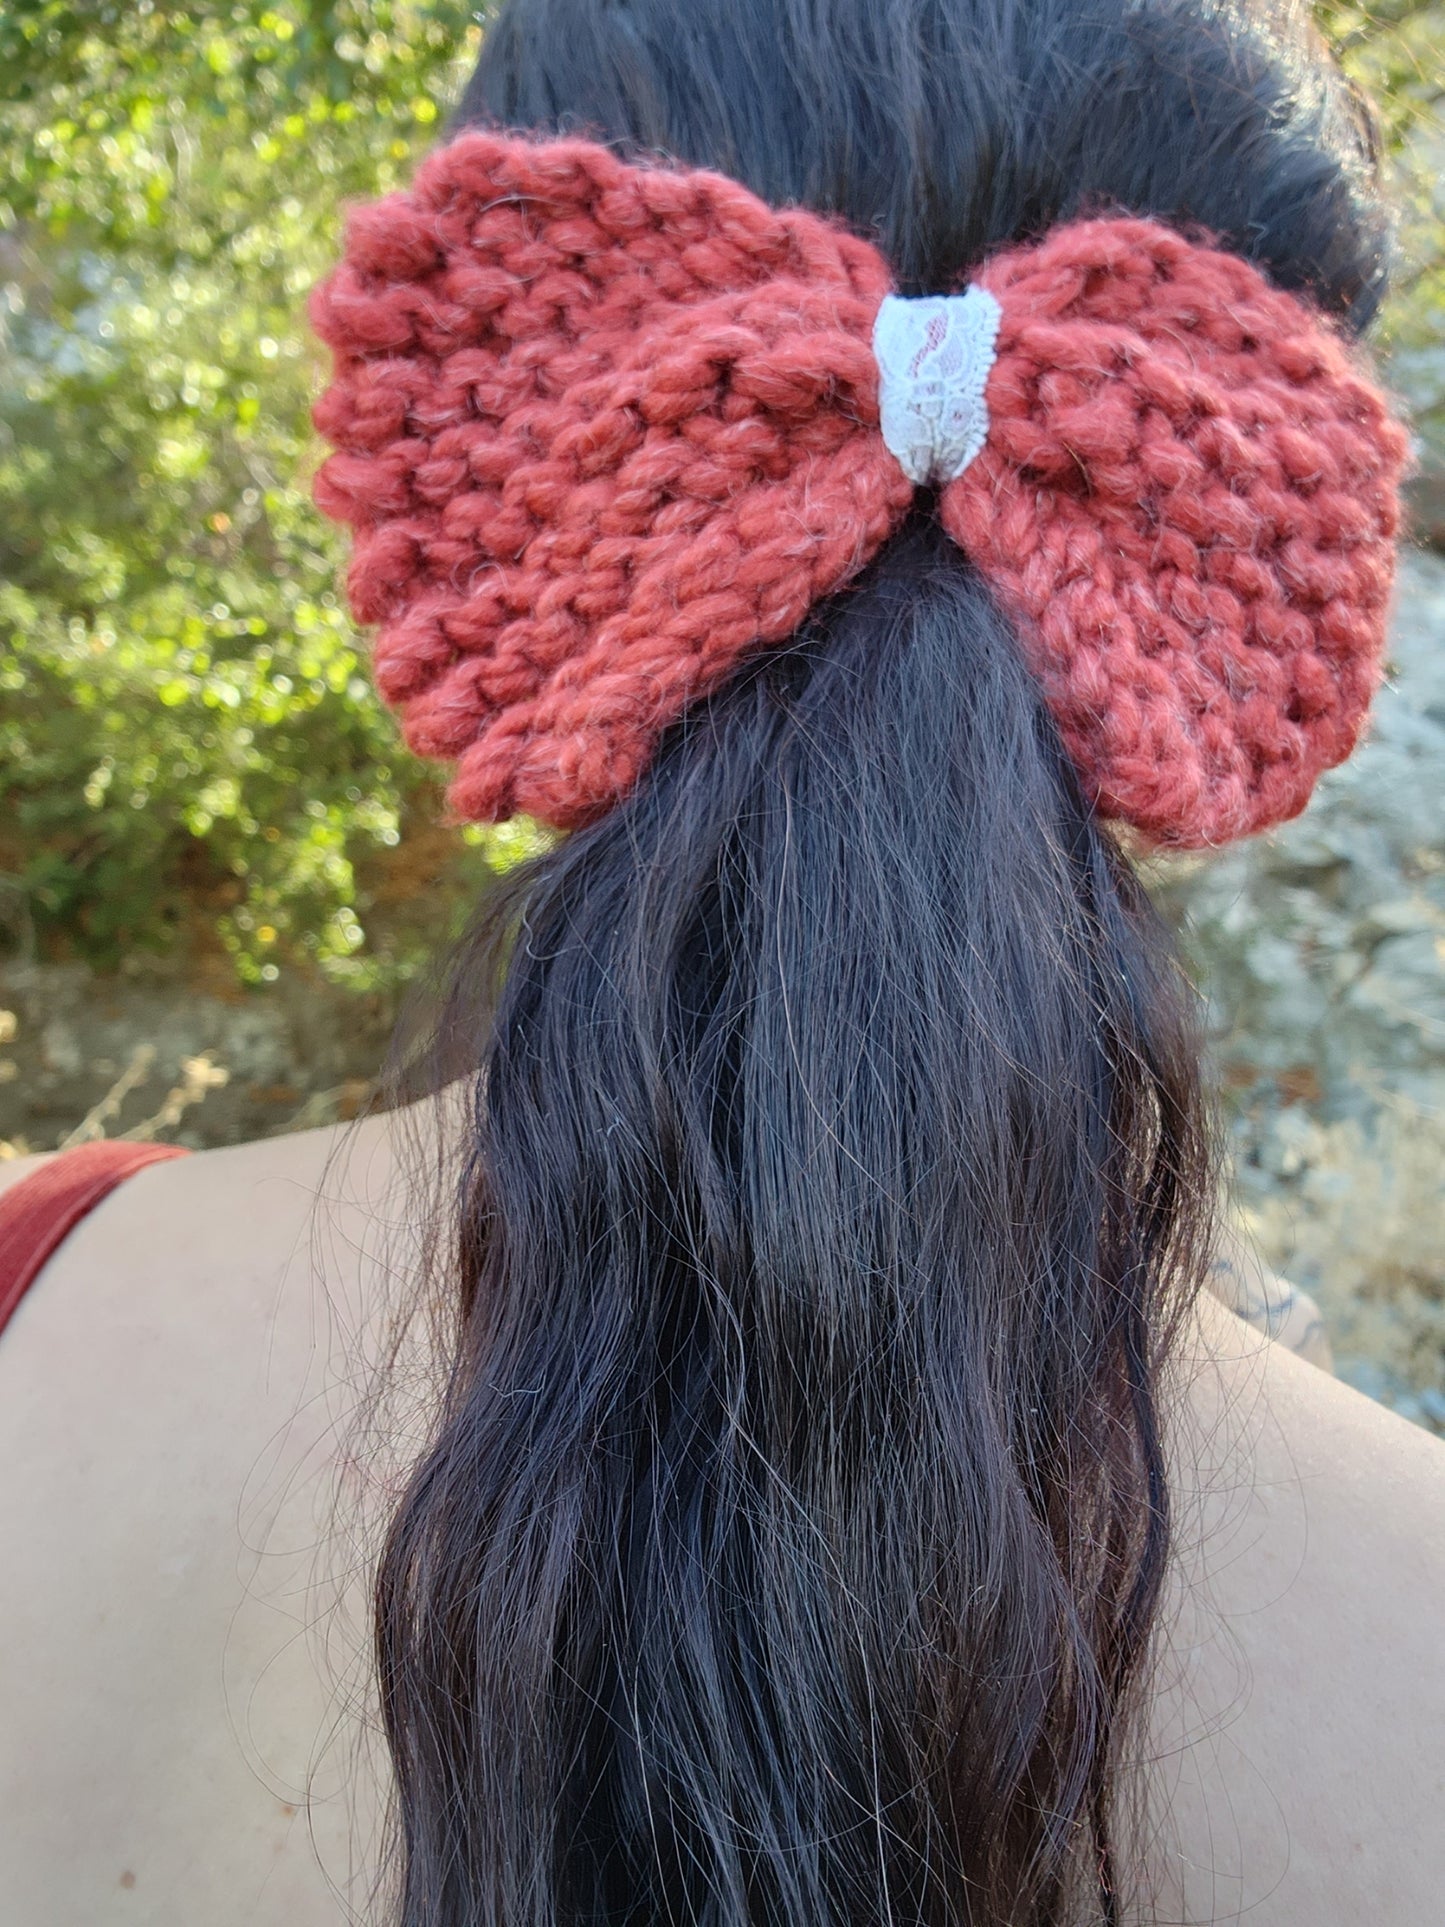 Handknit "Foxtail" Rust Color Hair Bow with Vintage Lace